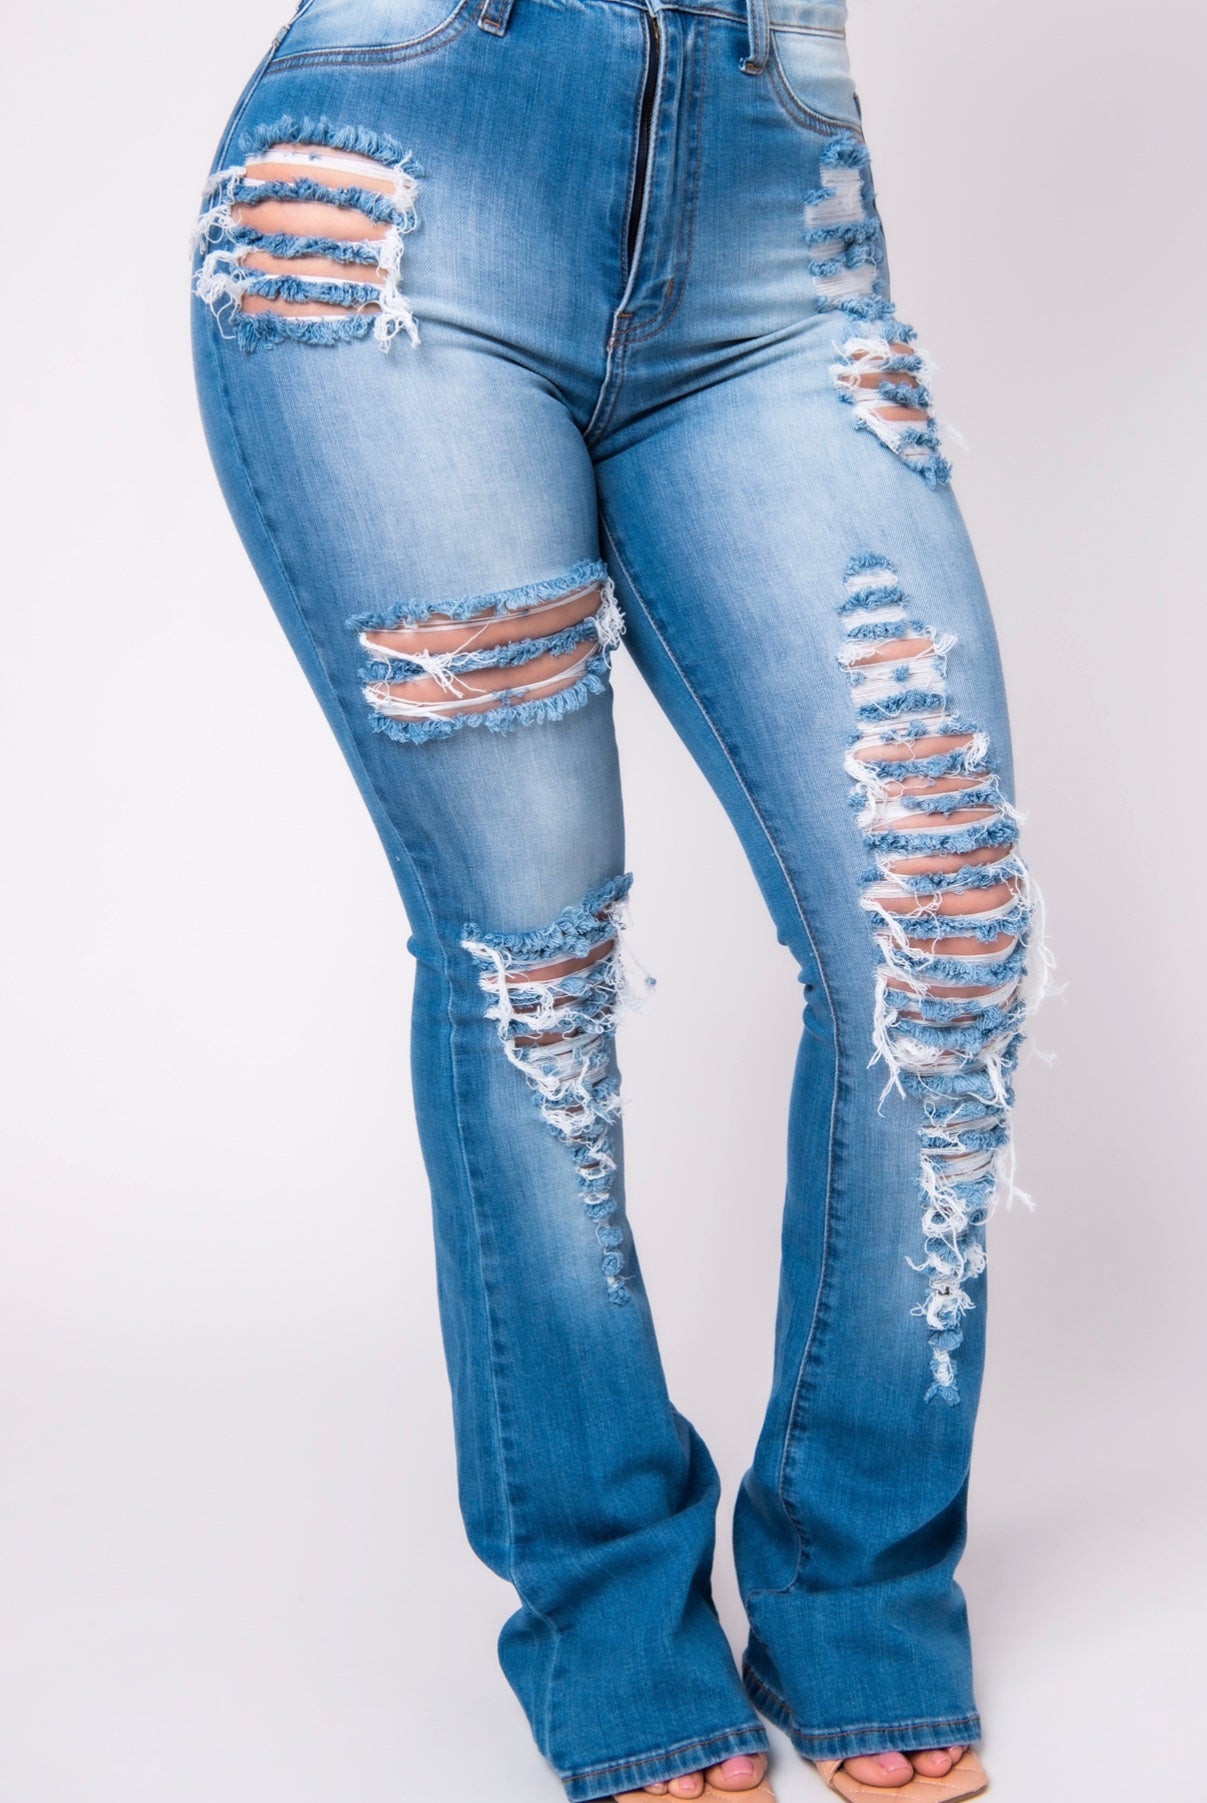 Bell Style Ripped Jean